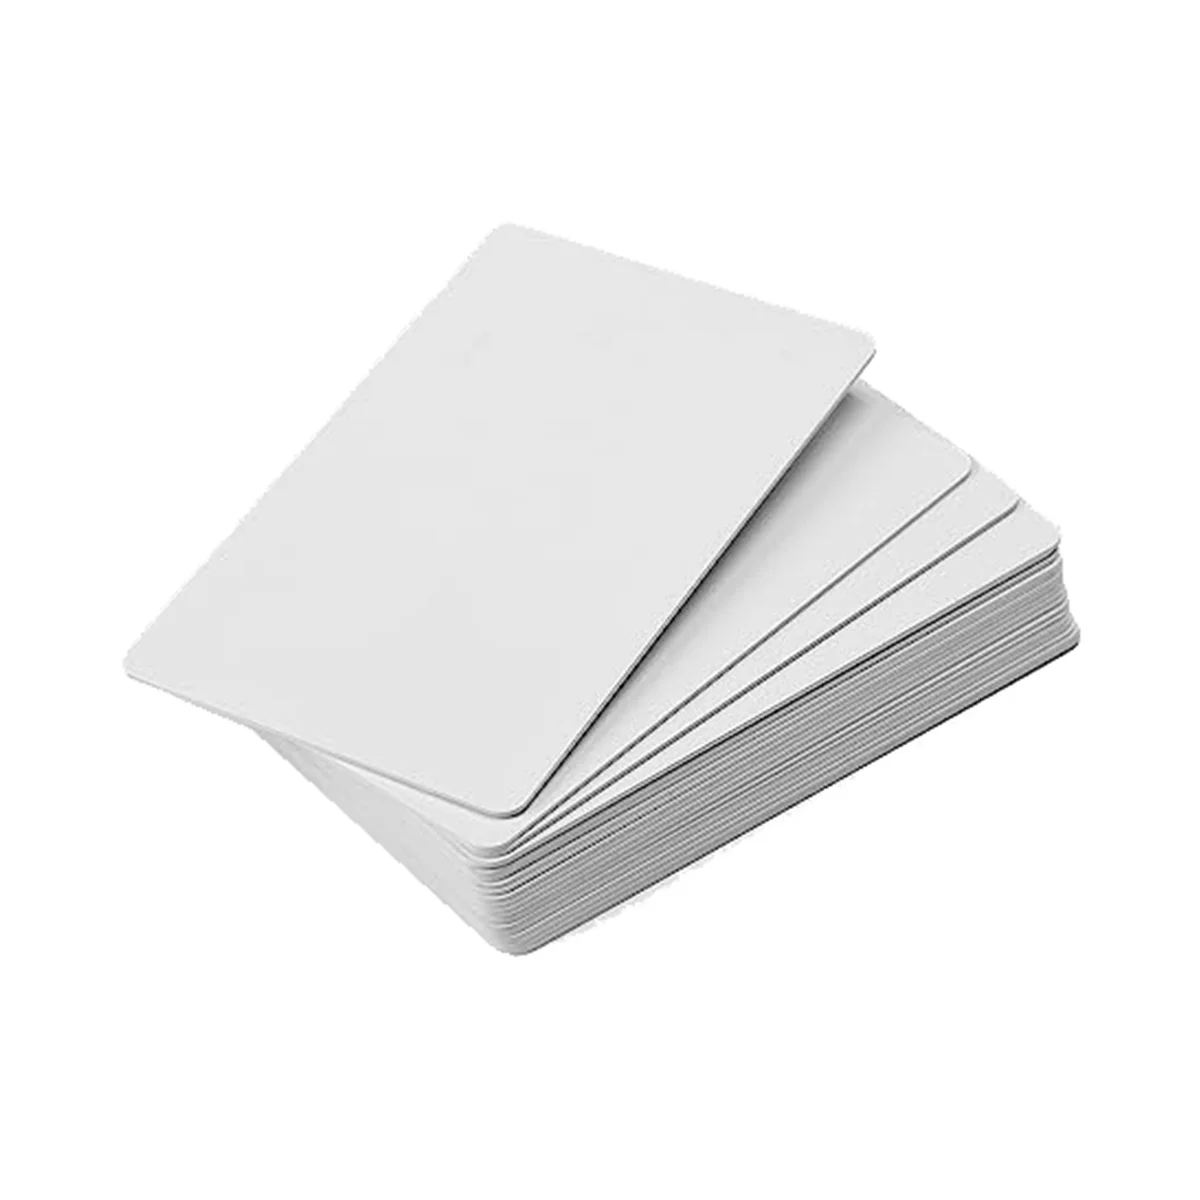 

100 PCS NFC Cards Blank 215 NFC Cards 215 Tags Rewritable NFC Cards 504 Bytes Memory for All NFC Enabled Device